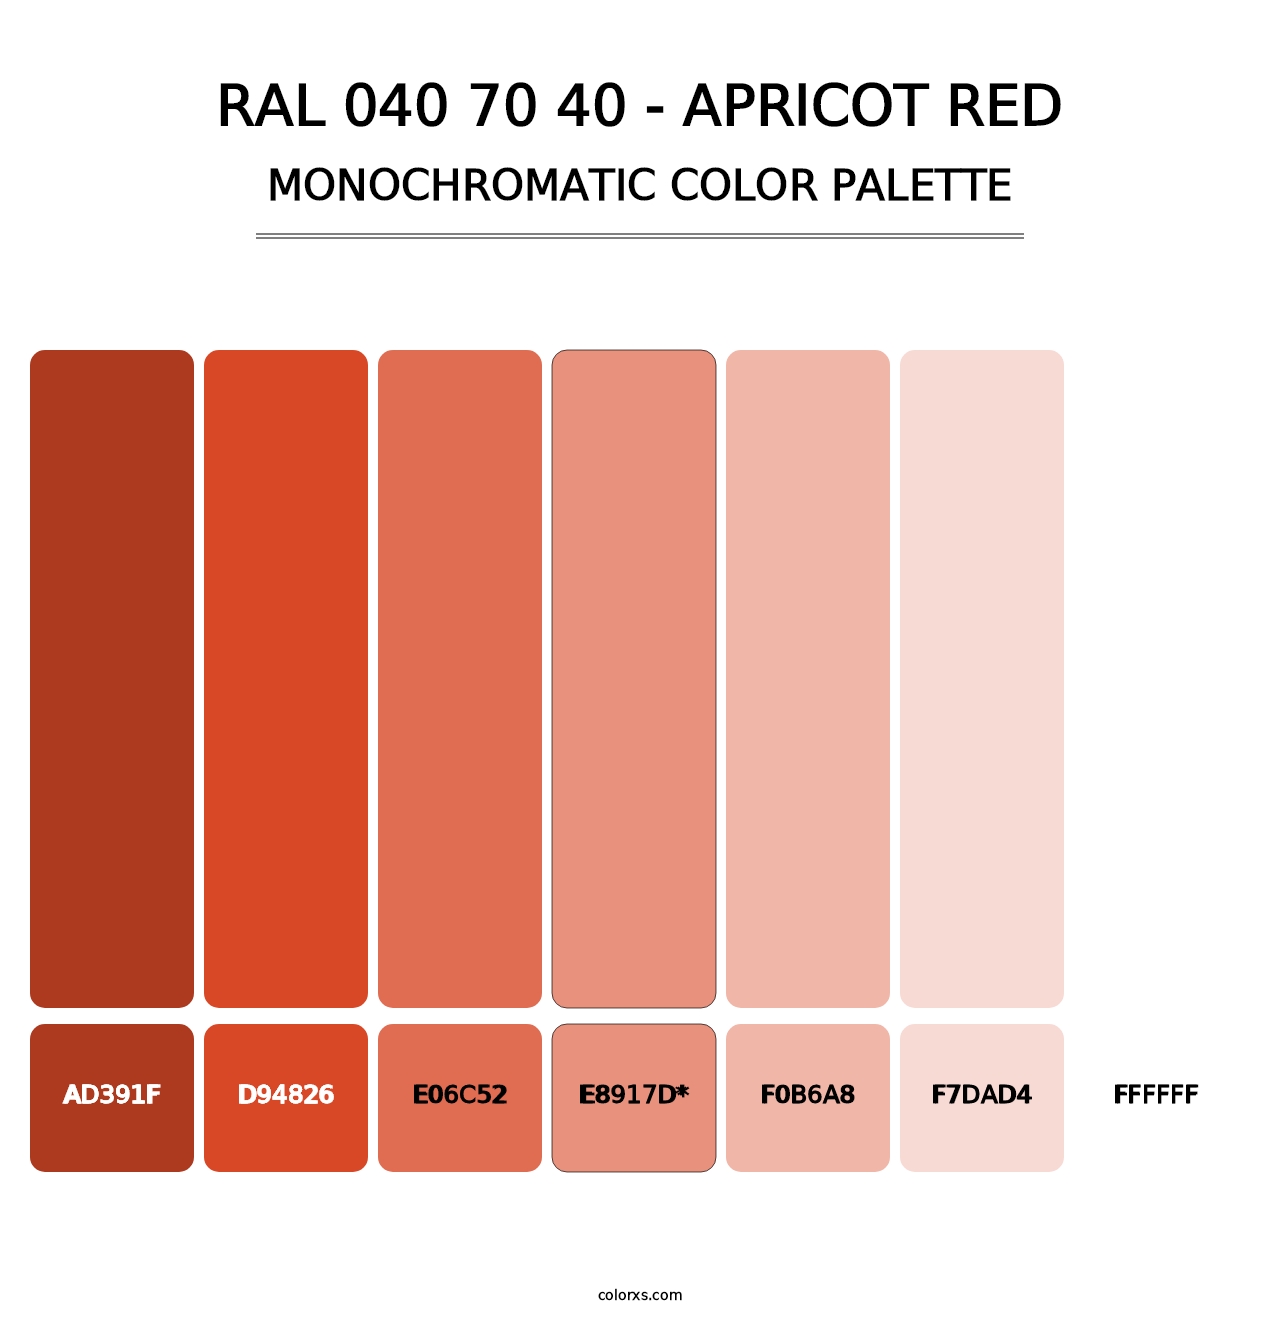 RAL 040 70 40 - Apricot Red - Monochromatic Color Palette